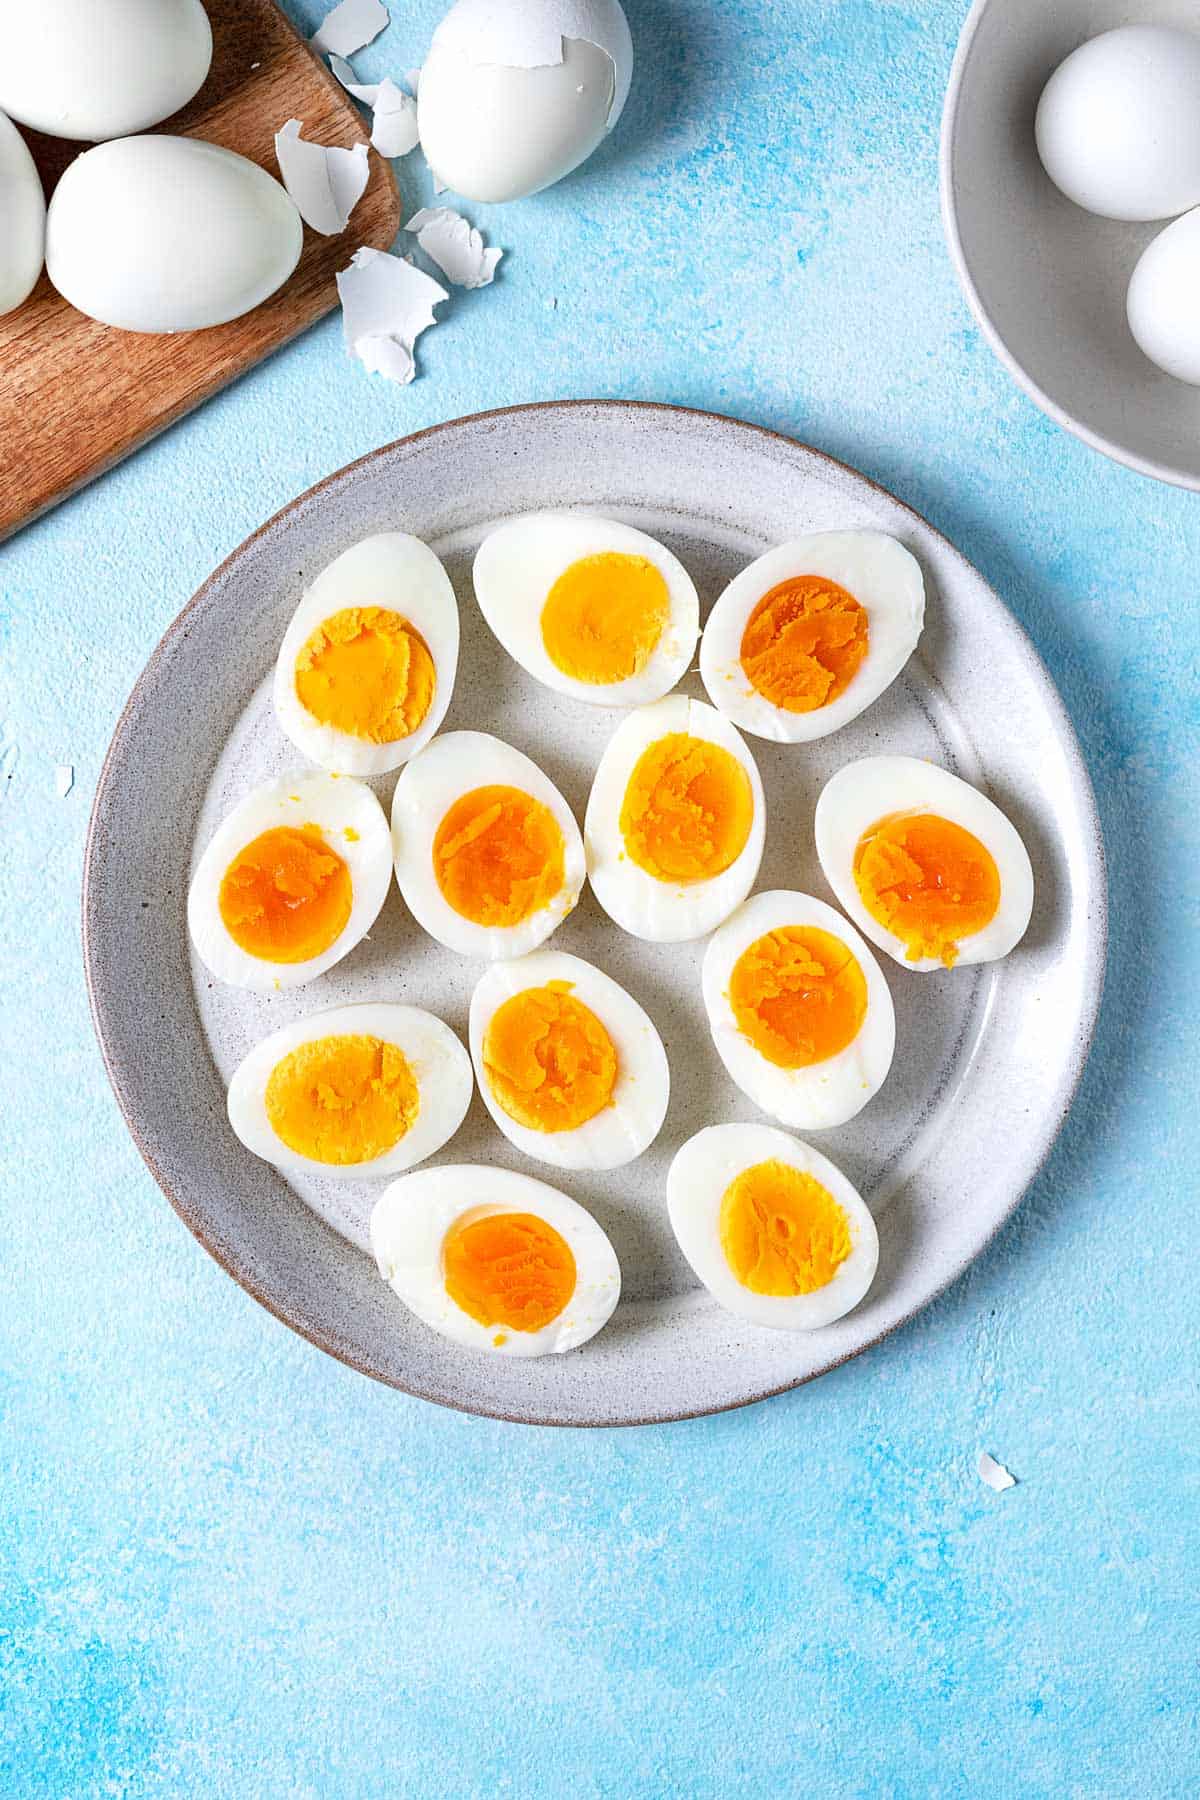 How To Boil an Egg